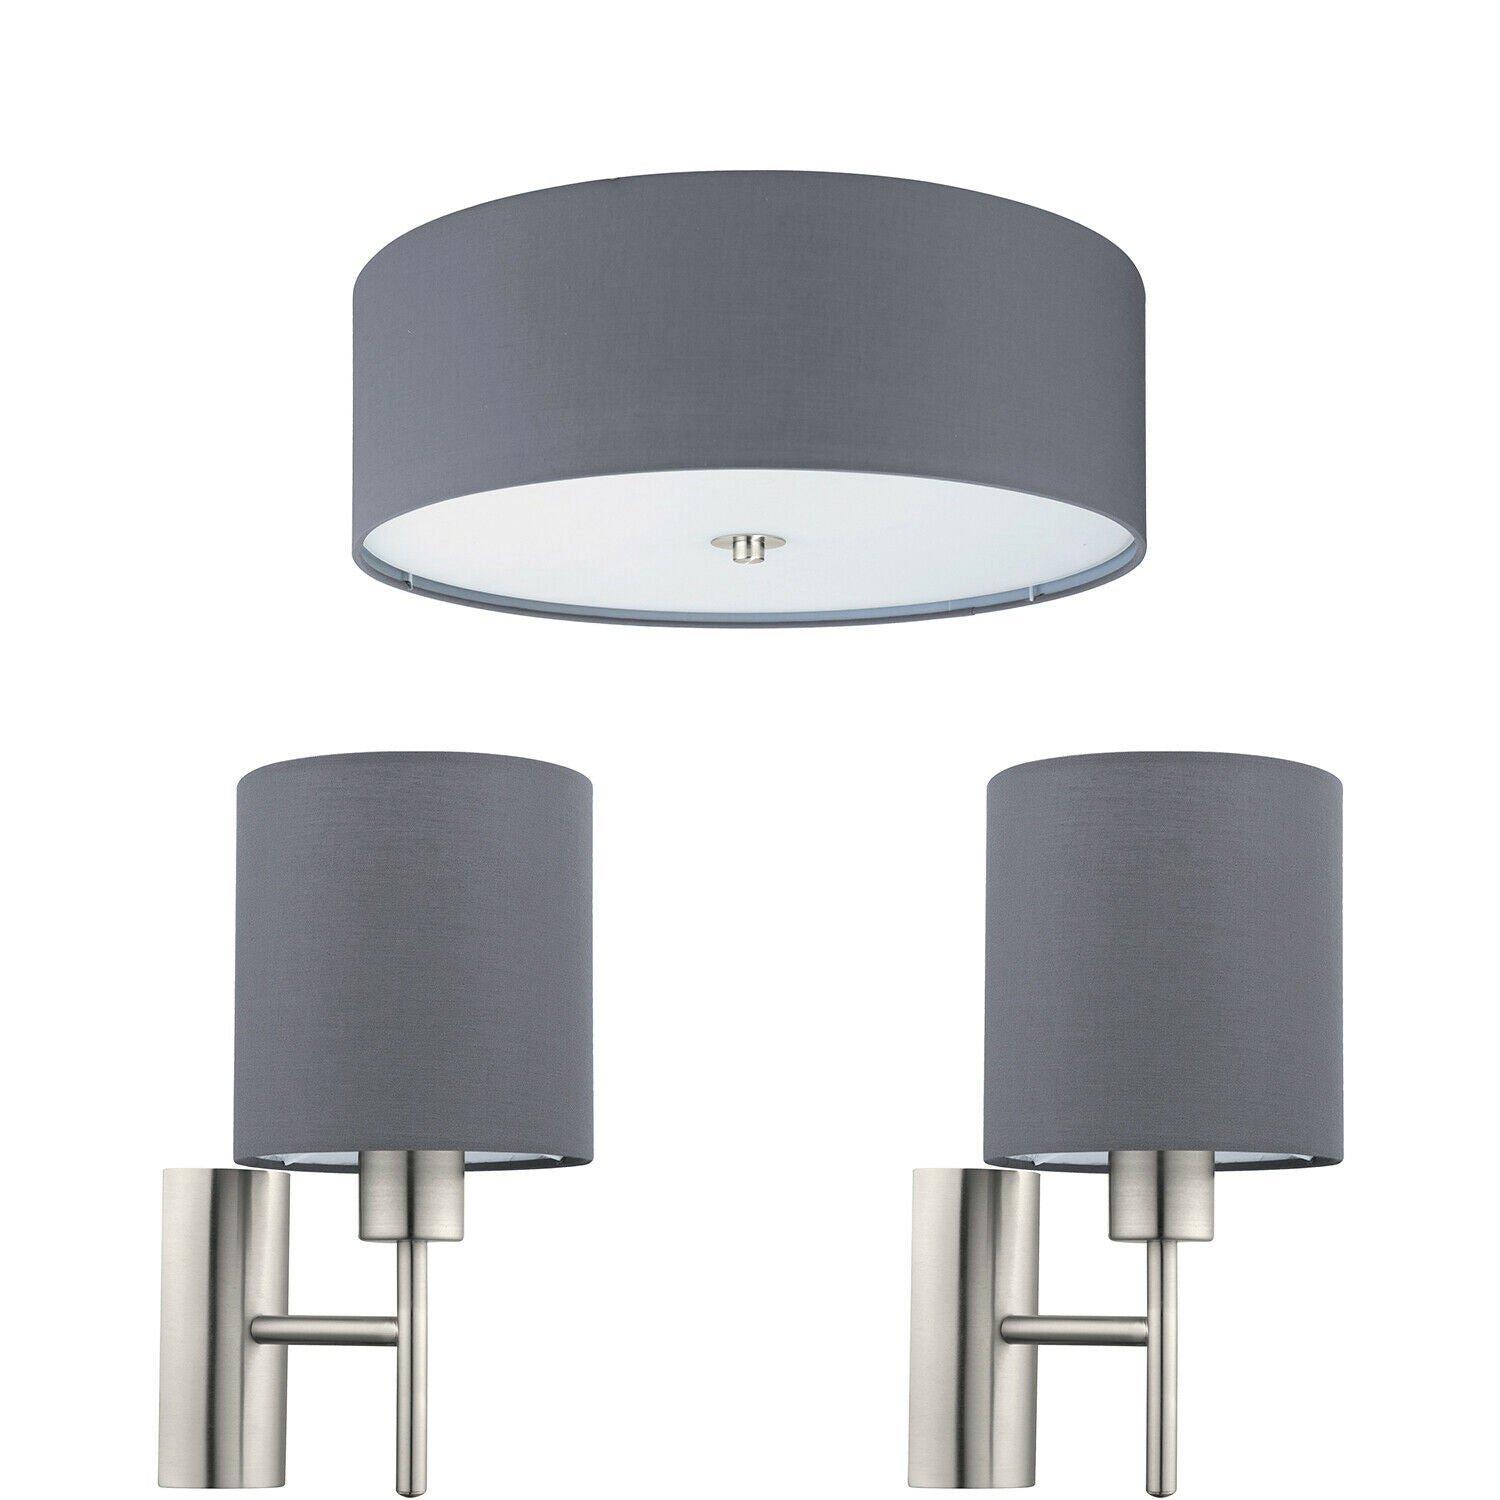 Low Ceiling Light & 2x Matching Wall Lights Grey Fabric Round Shade Lamp